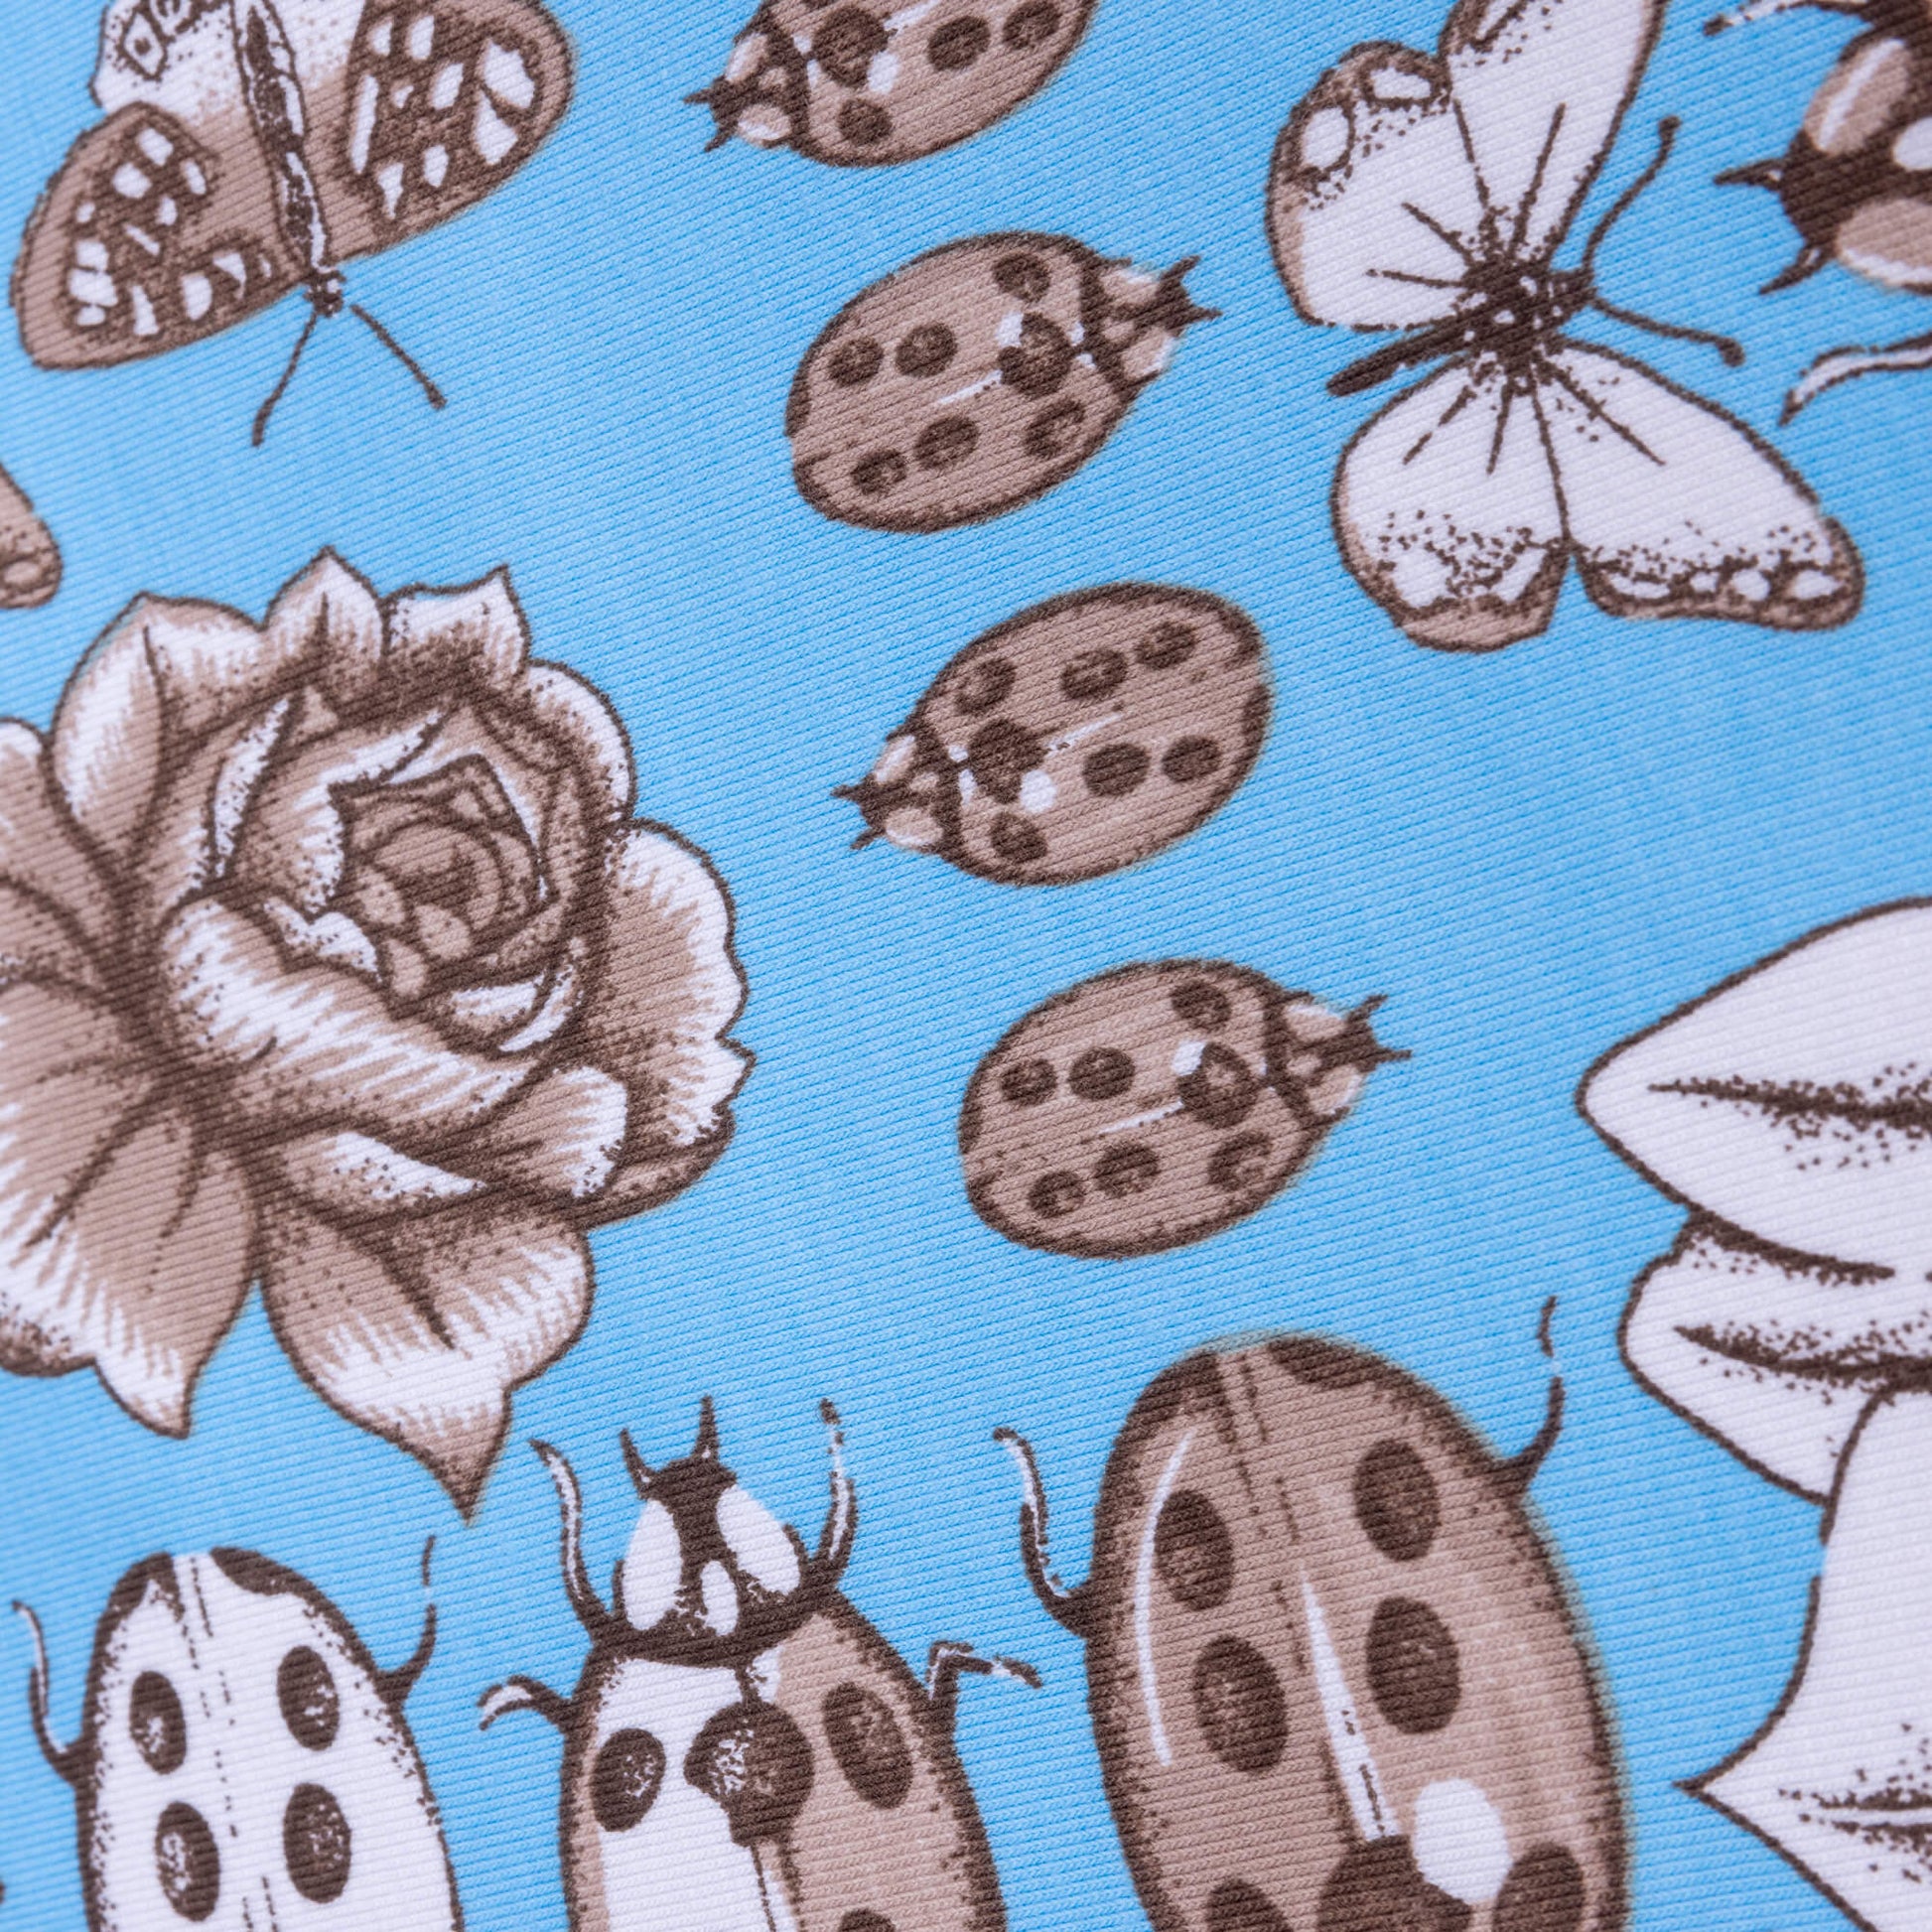 A close up of stretch jersey fabric featuring sketches of beetles, butterflies, florals and bugs on a light blue bright background